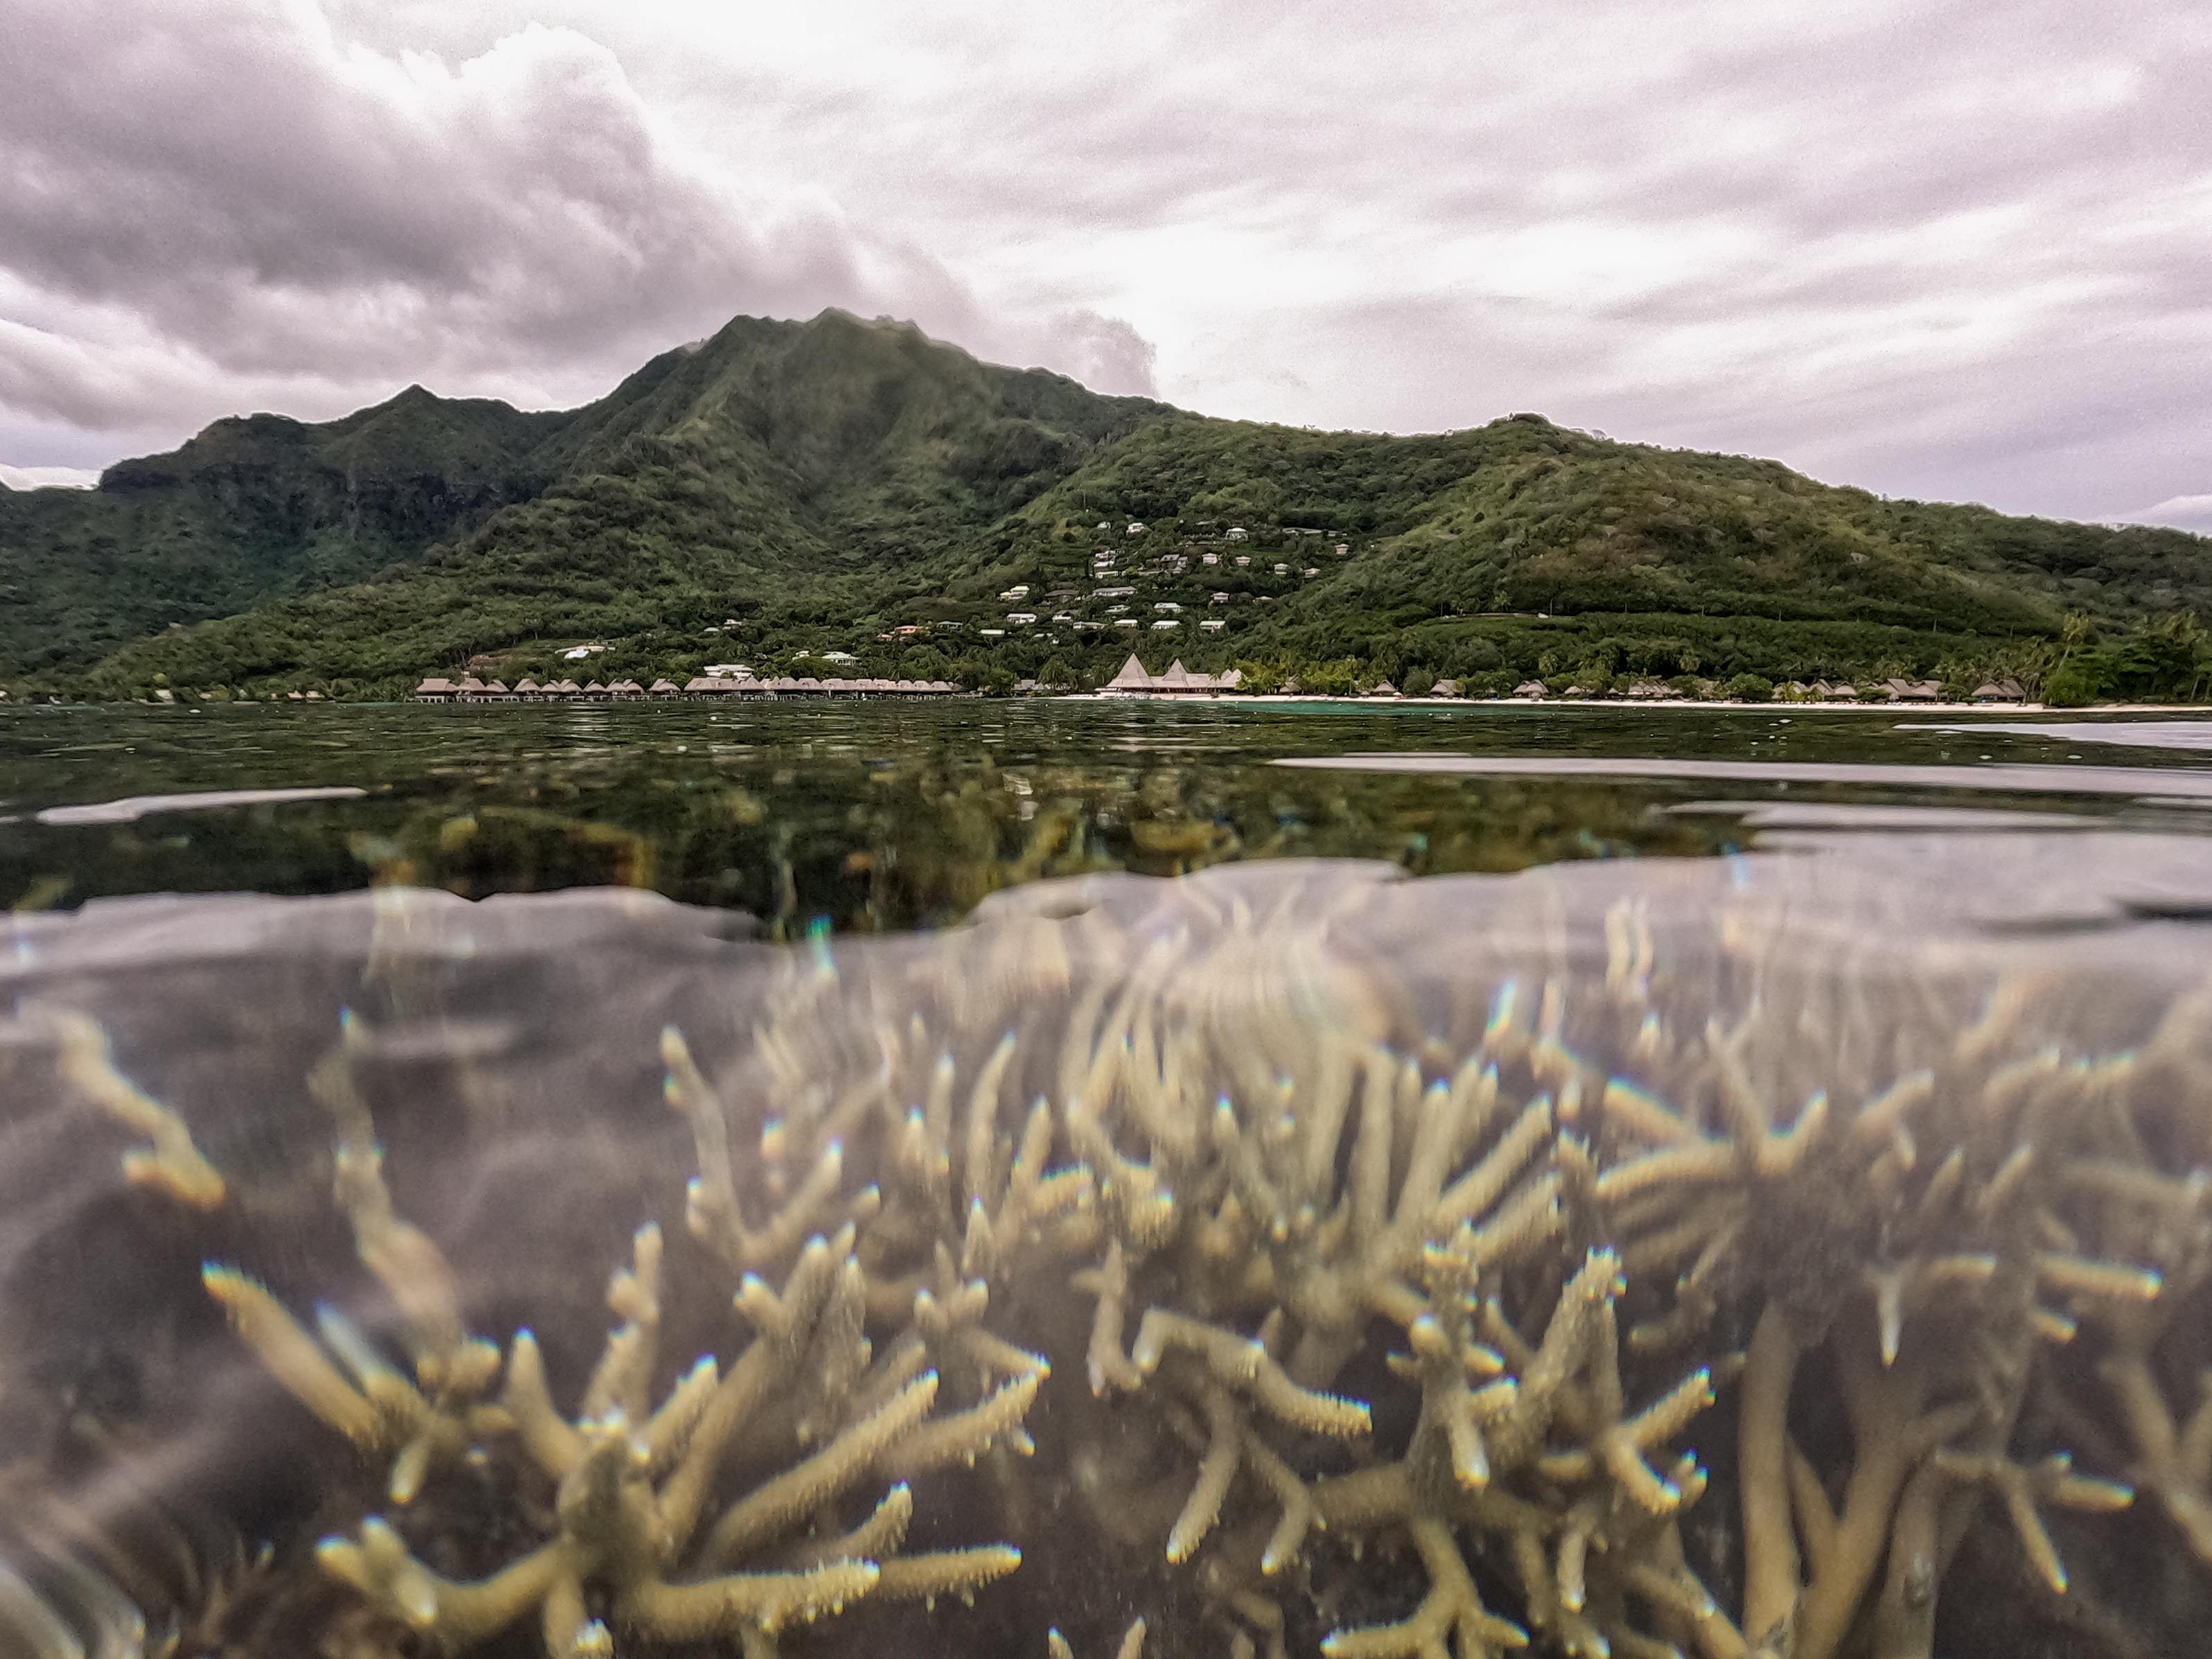 The island of Moorea situated above a network of Arcropora corals.